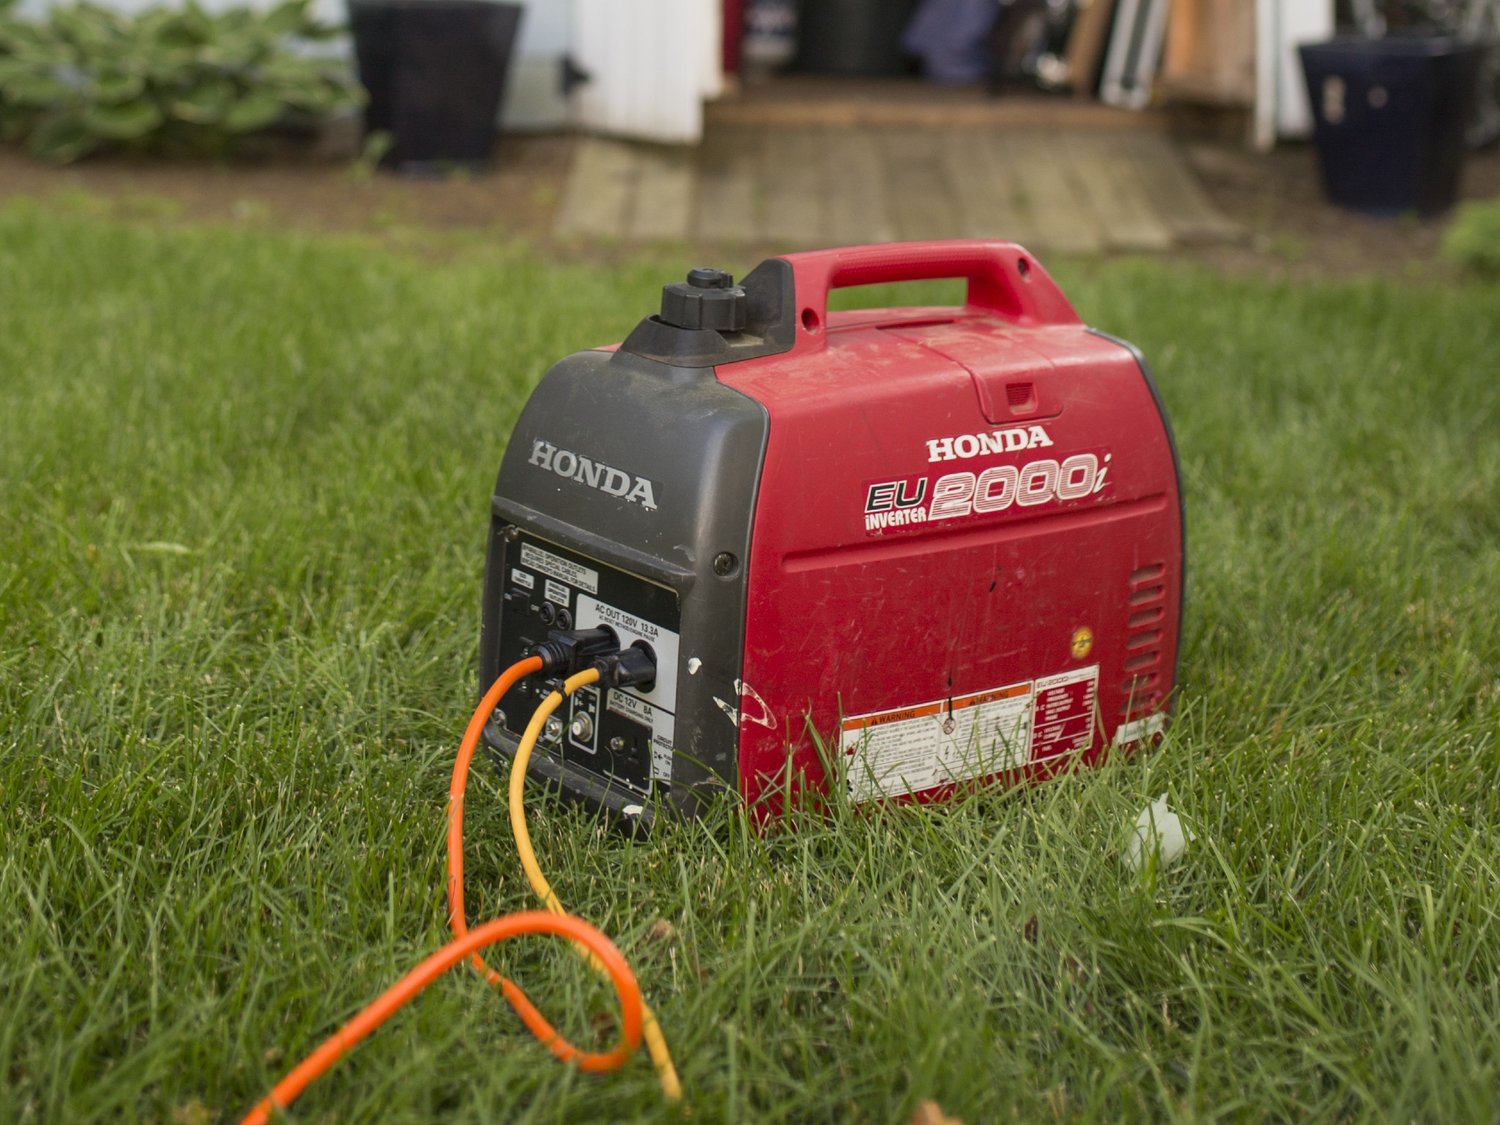 ONLY USE OUTDOORS — Portable generators should never be used indoors, as the exhaust contains carbon monoxide, according to an announcement Wednesday by National Grid. Generators should only be operated outside — and from there safely run connections into the home.